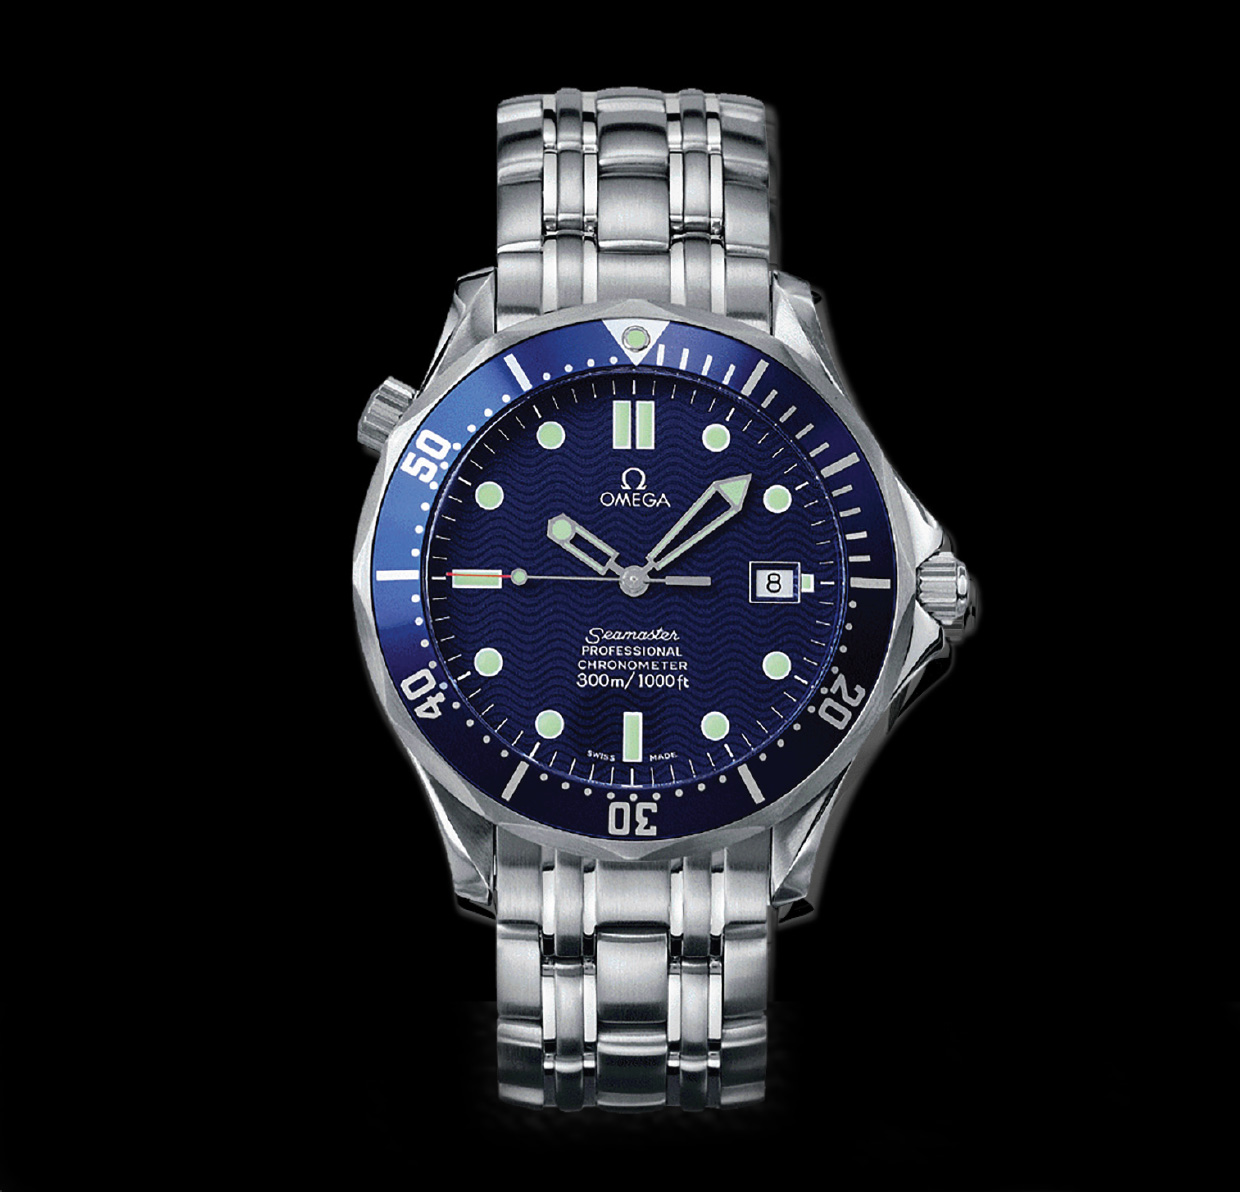 Omega Seamaster Diver 300M 007 Edition - the new James ...